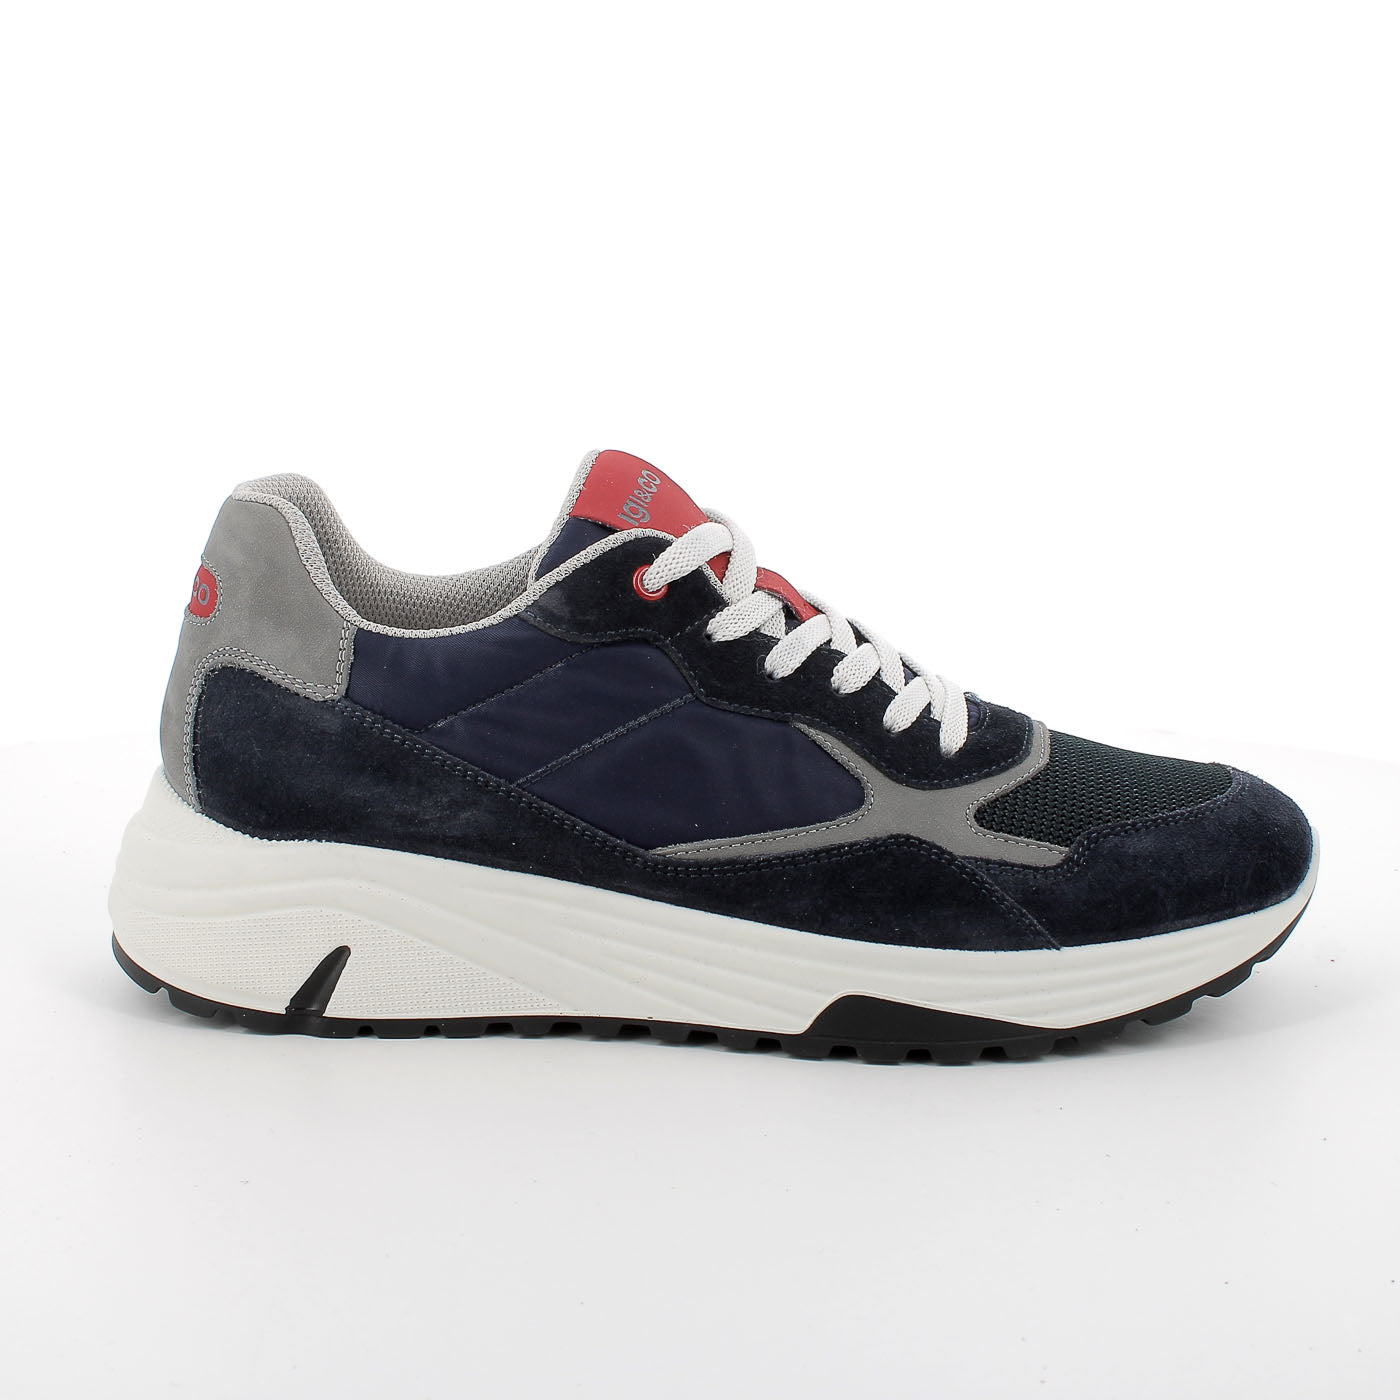 Igi & Co Men's Navy Runner Shoes with Red Accents and Memory Foam Insole